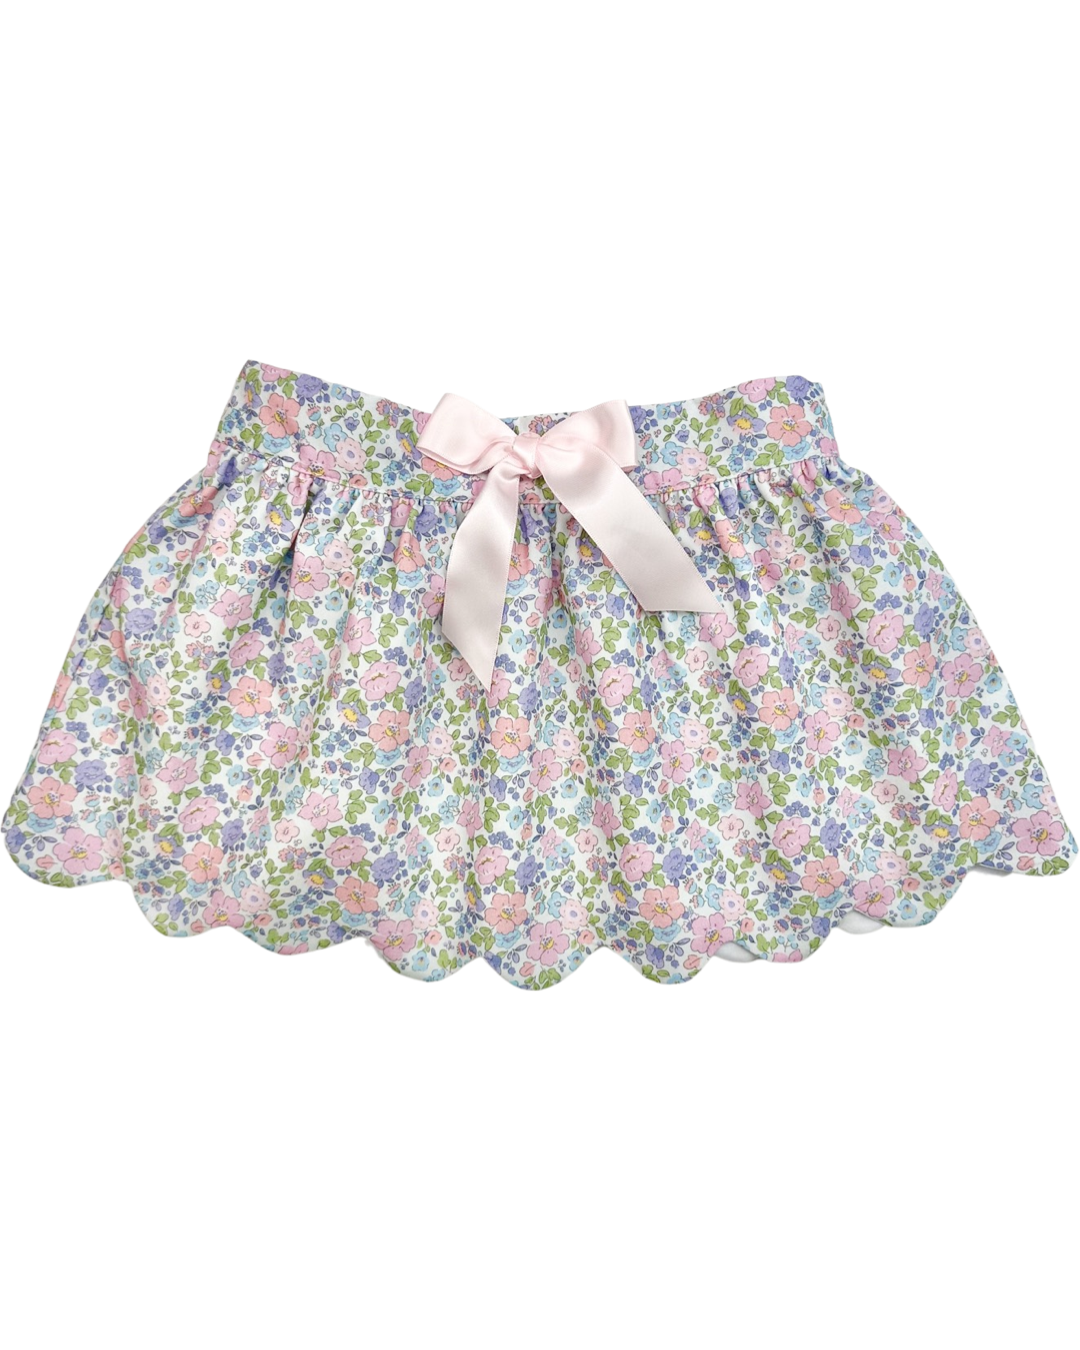 Susie Scallop Skirt - Floral (3T,4T,5,6)